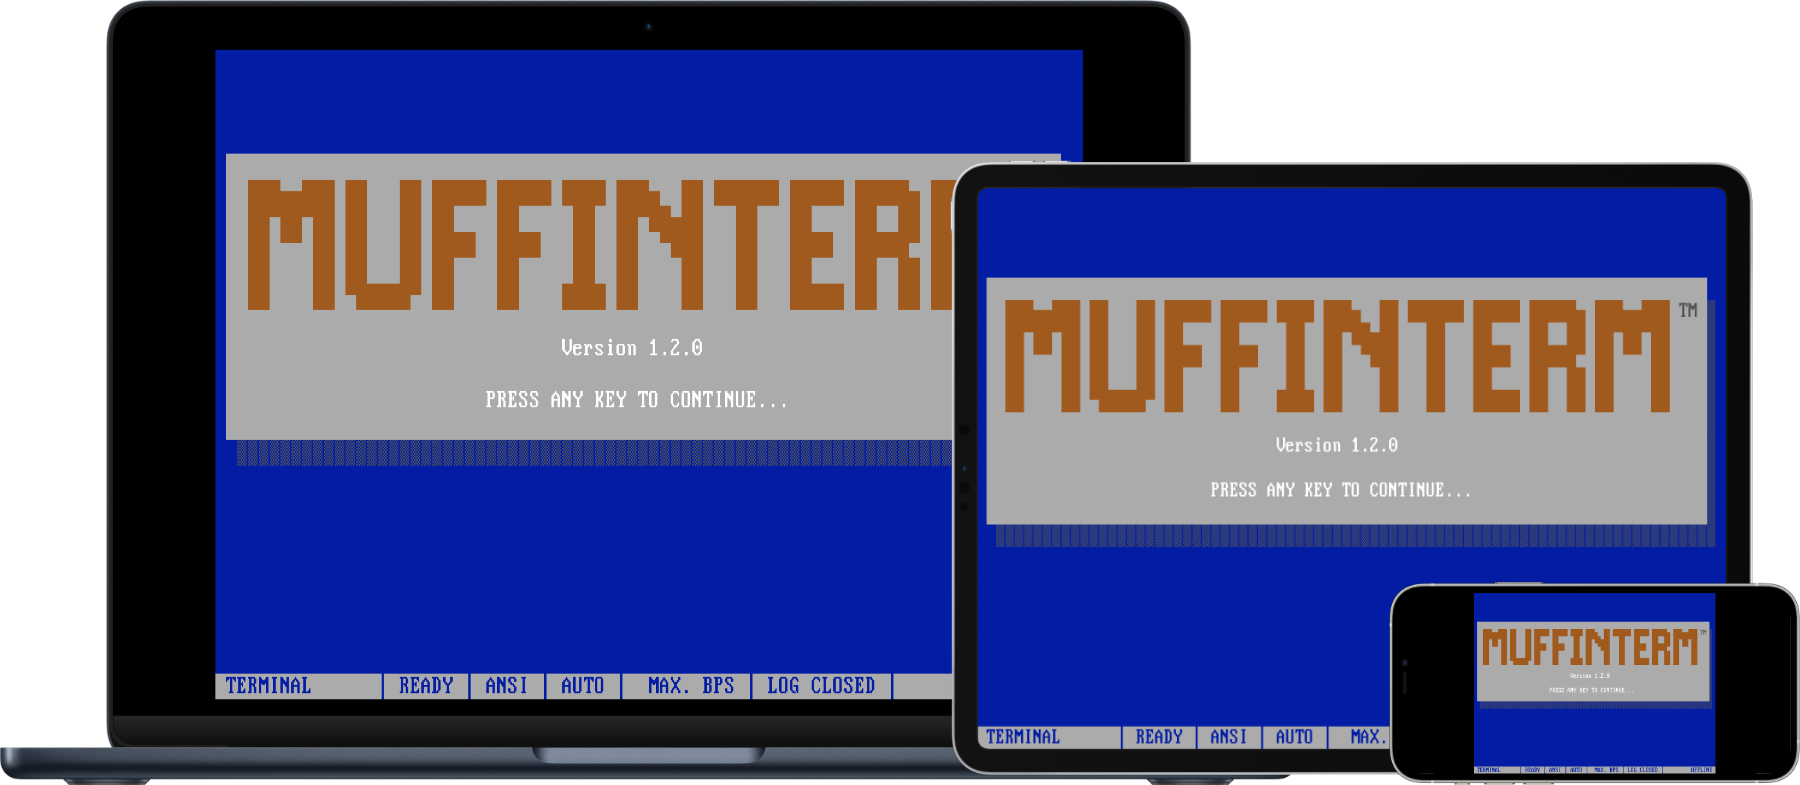 [MacBook Air, iPad Pro, and iPhone, all showing the MuffinTerm startup screen]